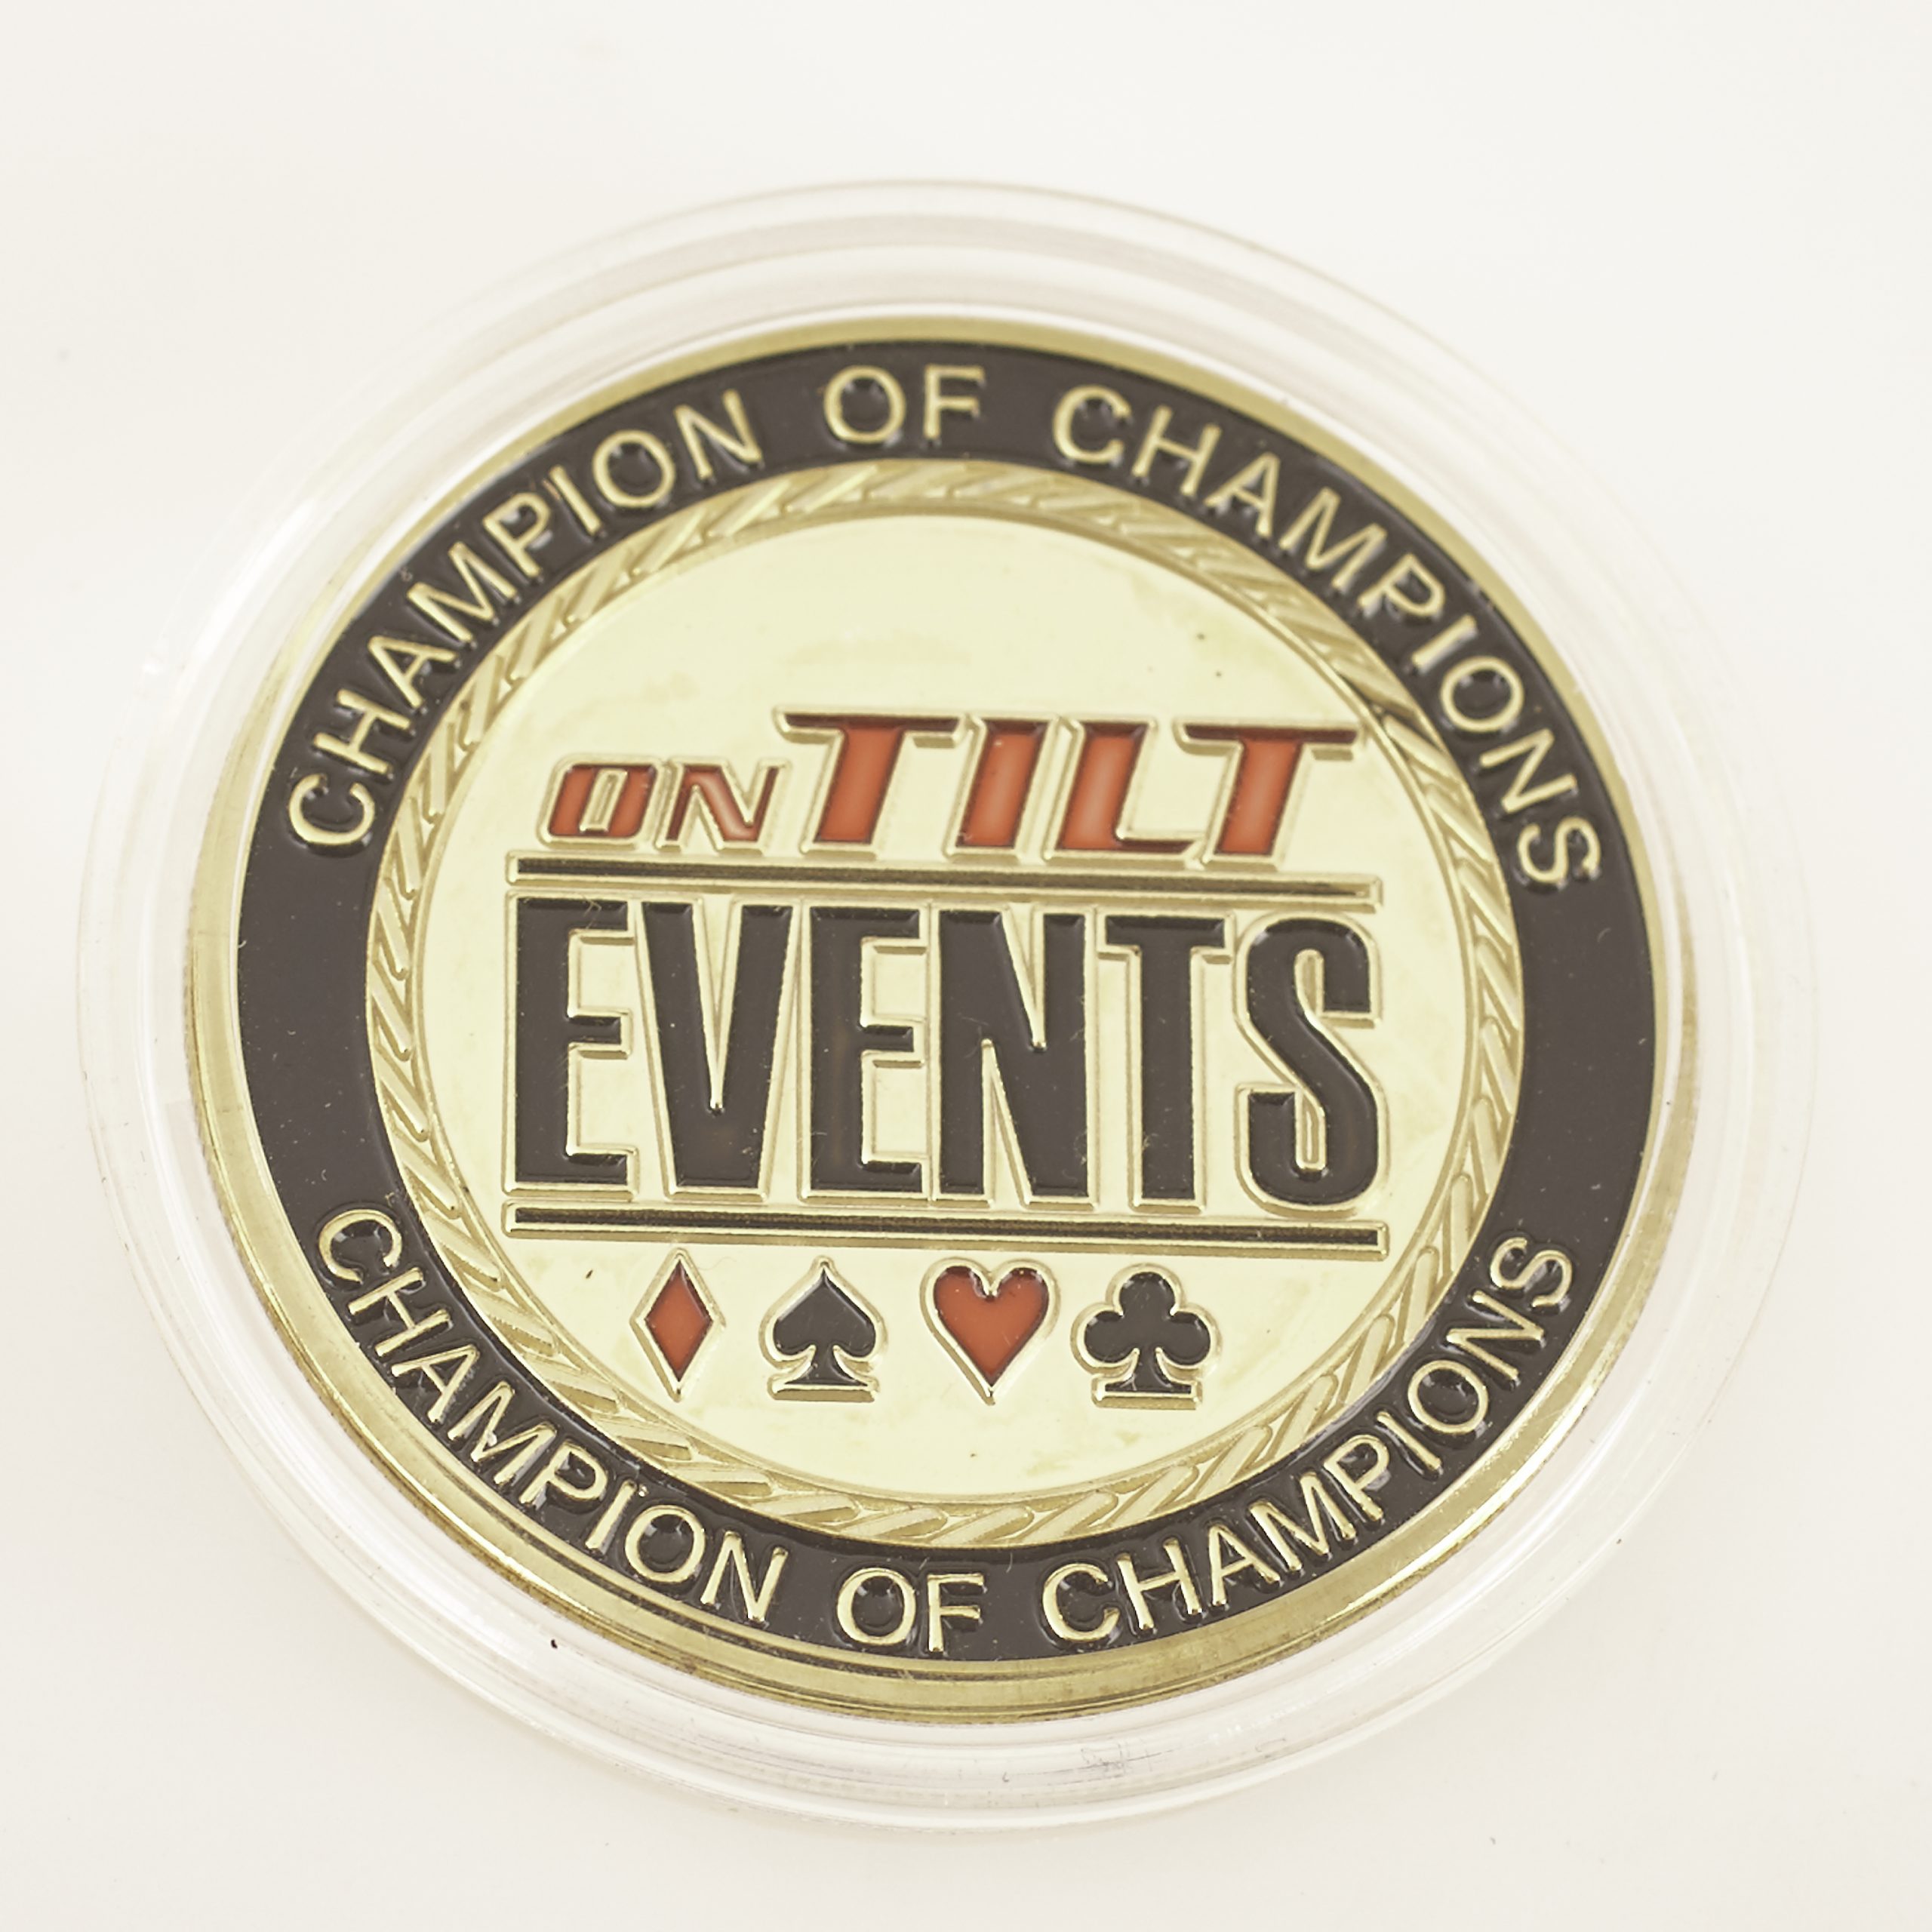 ON TILT EVENTS, CHAMPION OF CHAMPIONS, Poker Card Guard